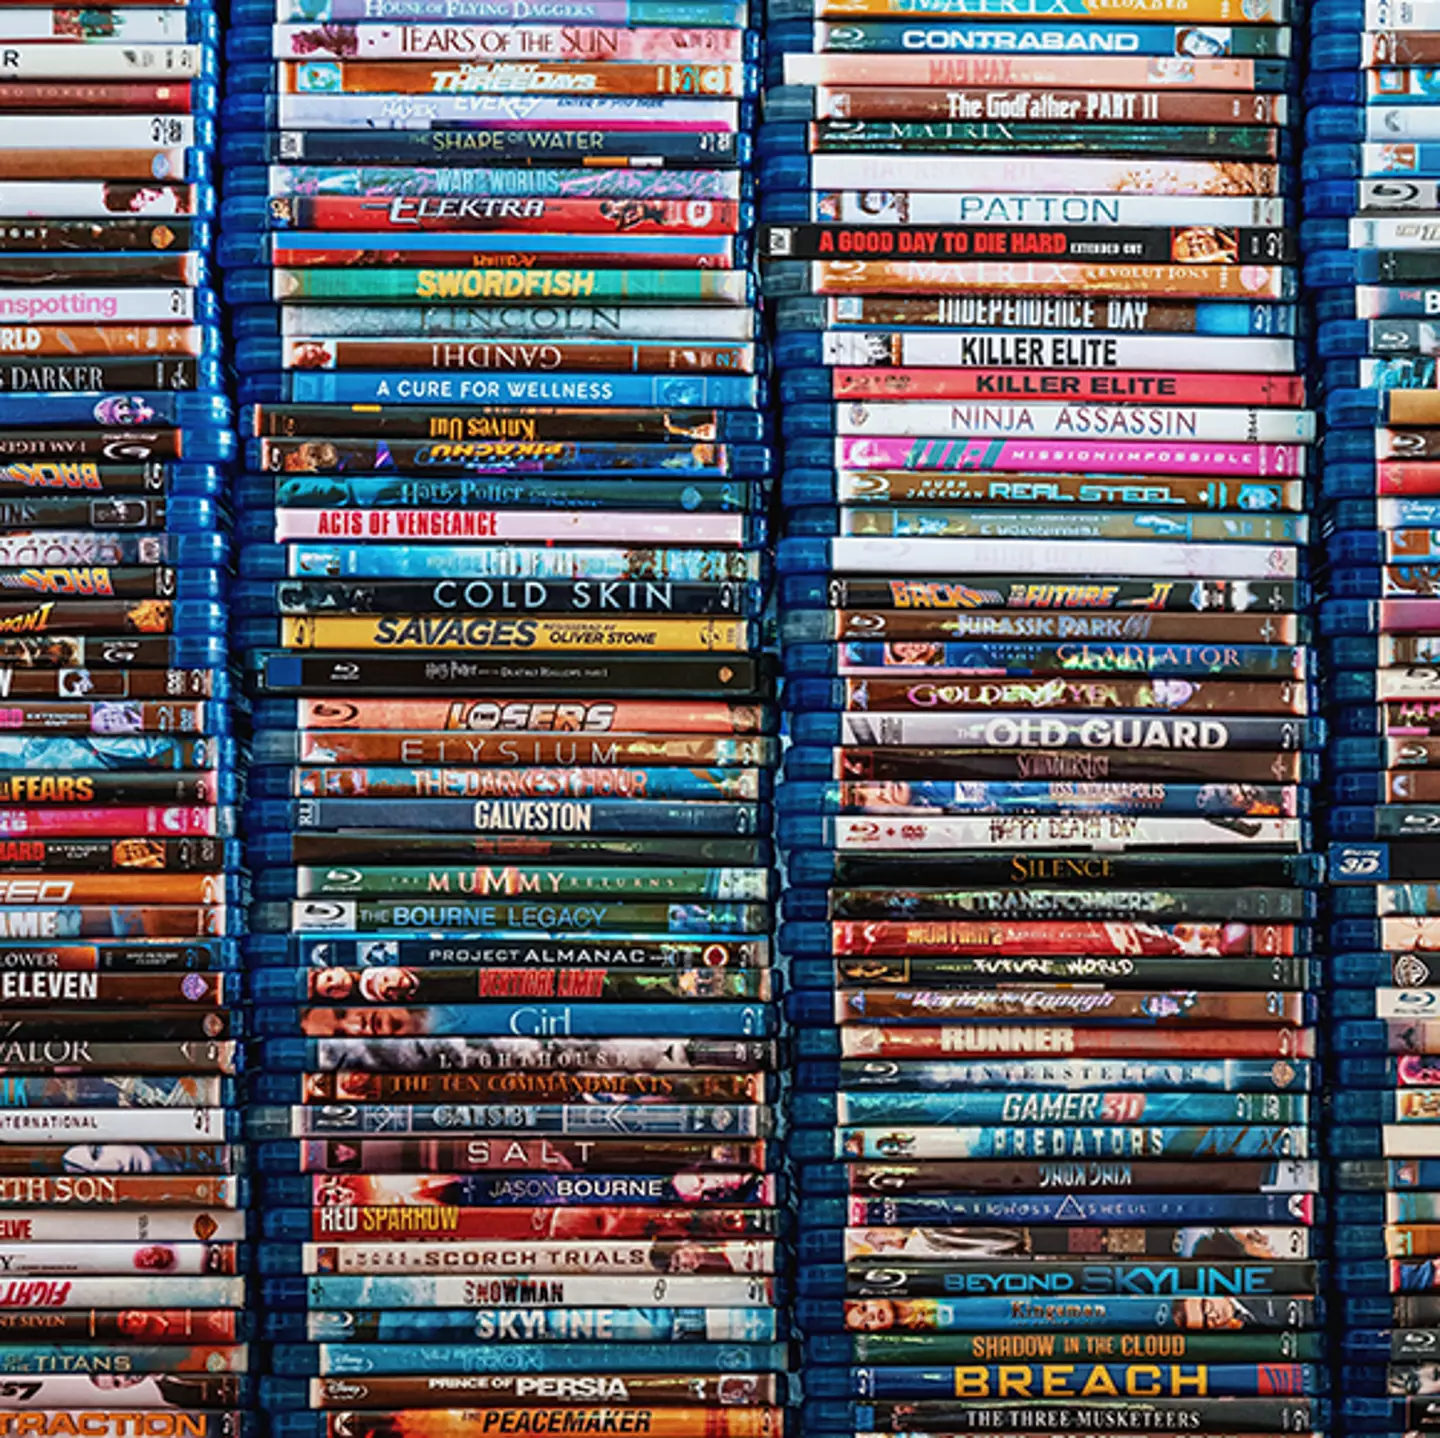 The first ever movies released on DVD might take you by surprise